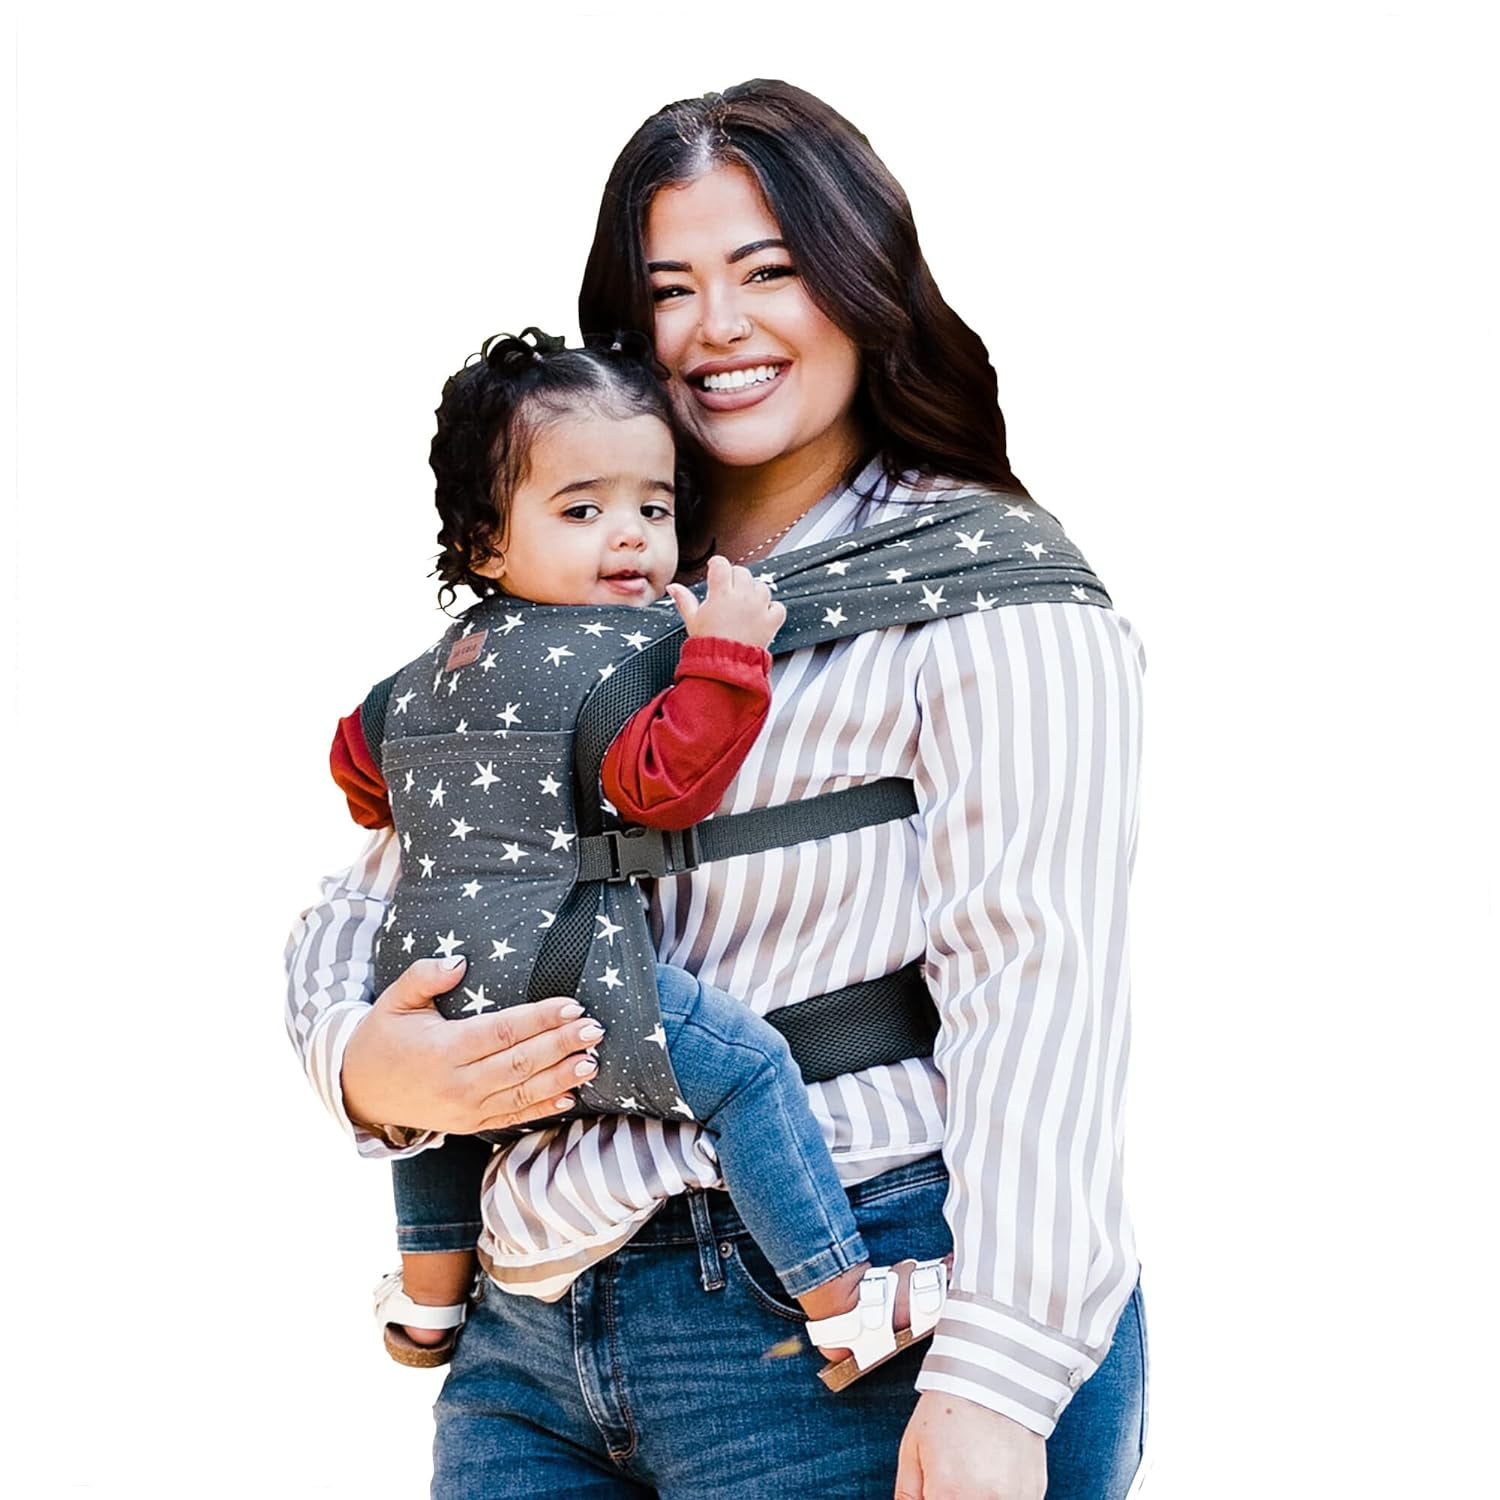  Baby Carrier, Embrace Cozy 4-in-2 Infant Carrier Ergonomic  Adjustable Holder Portable Convertible Front And Back